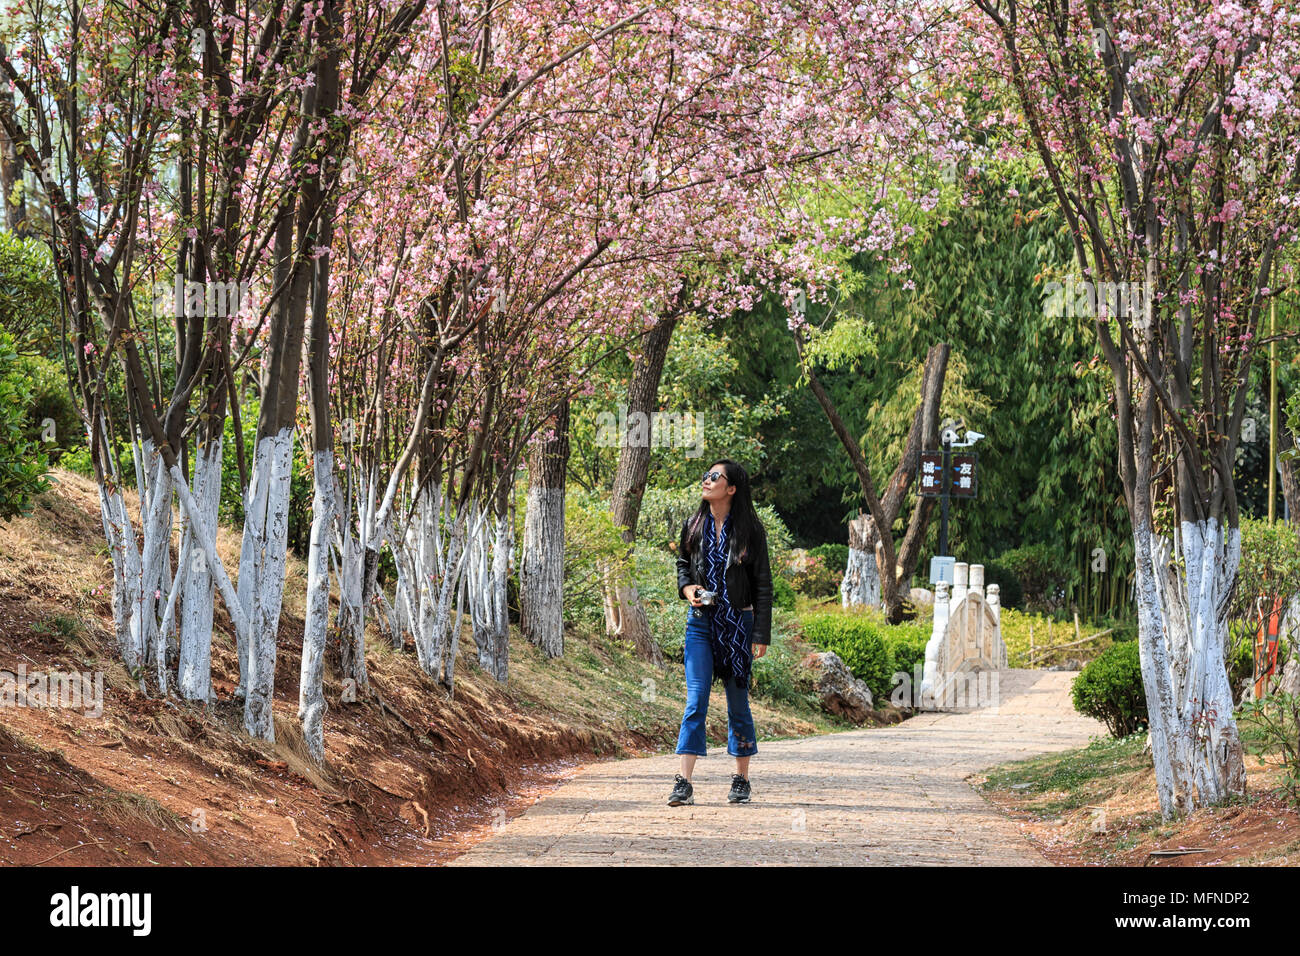 Lijiang, China - March 23, 2018: Attractive young Chinese woman walking under cherry trees in fool bloom in Lijiang, Yunnan - China Stock Photo